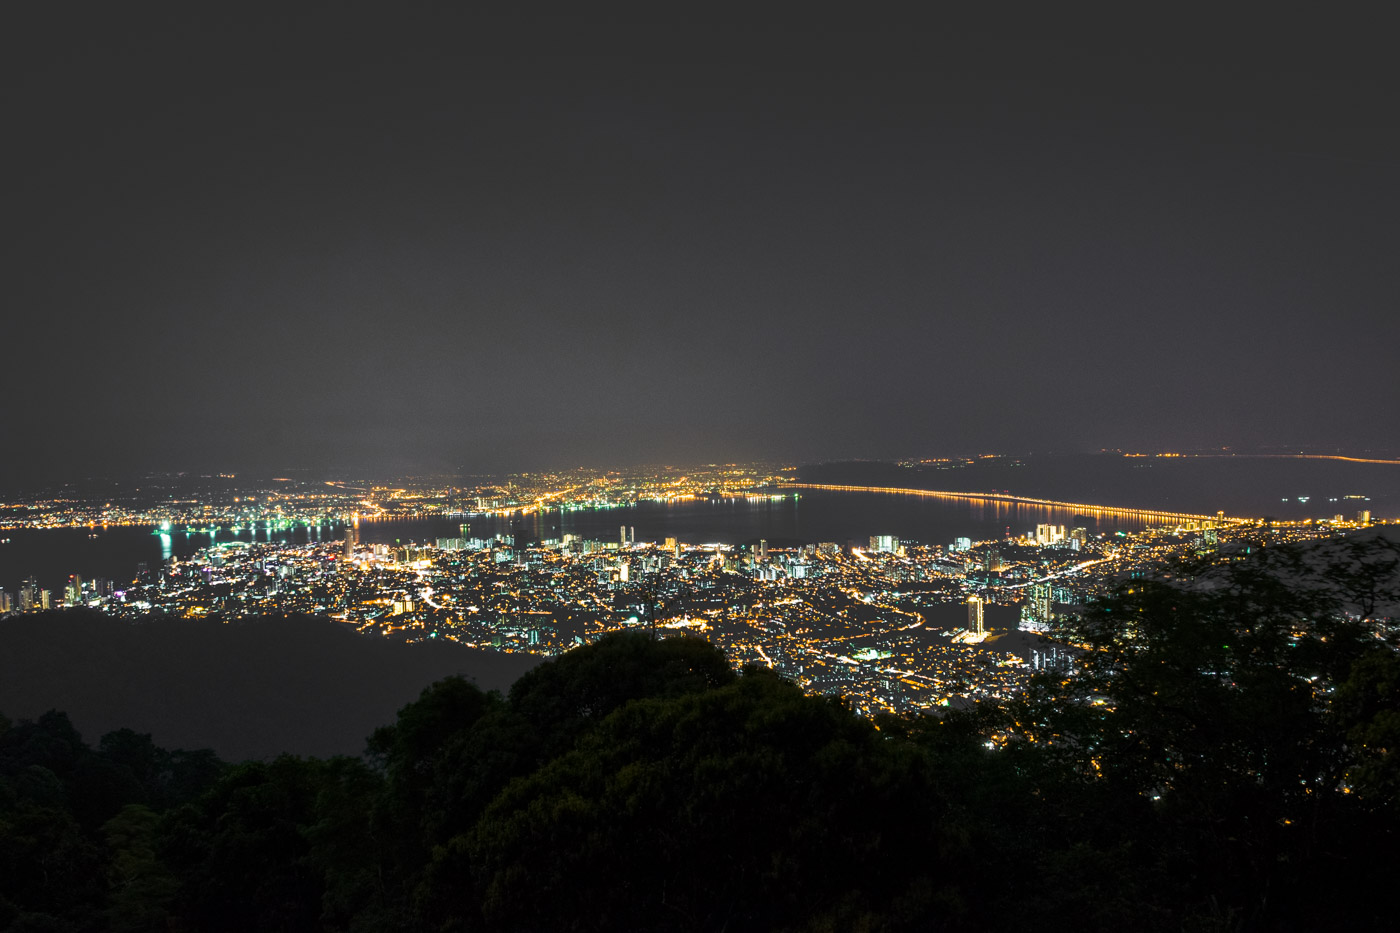 The view of Penang City at night from above